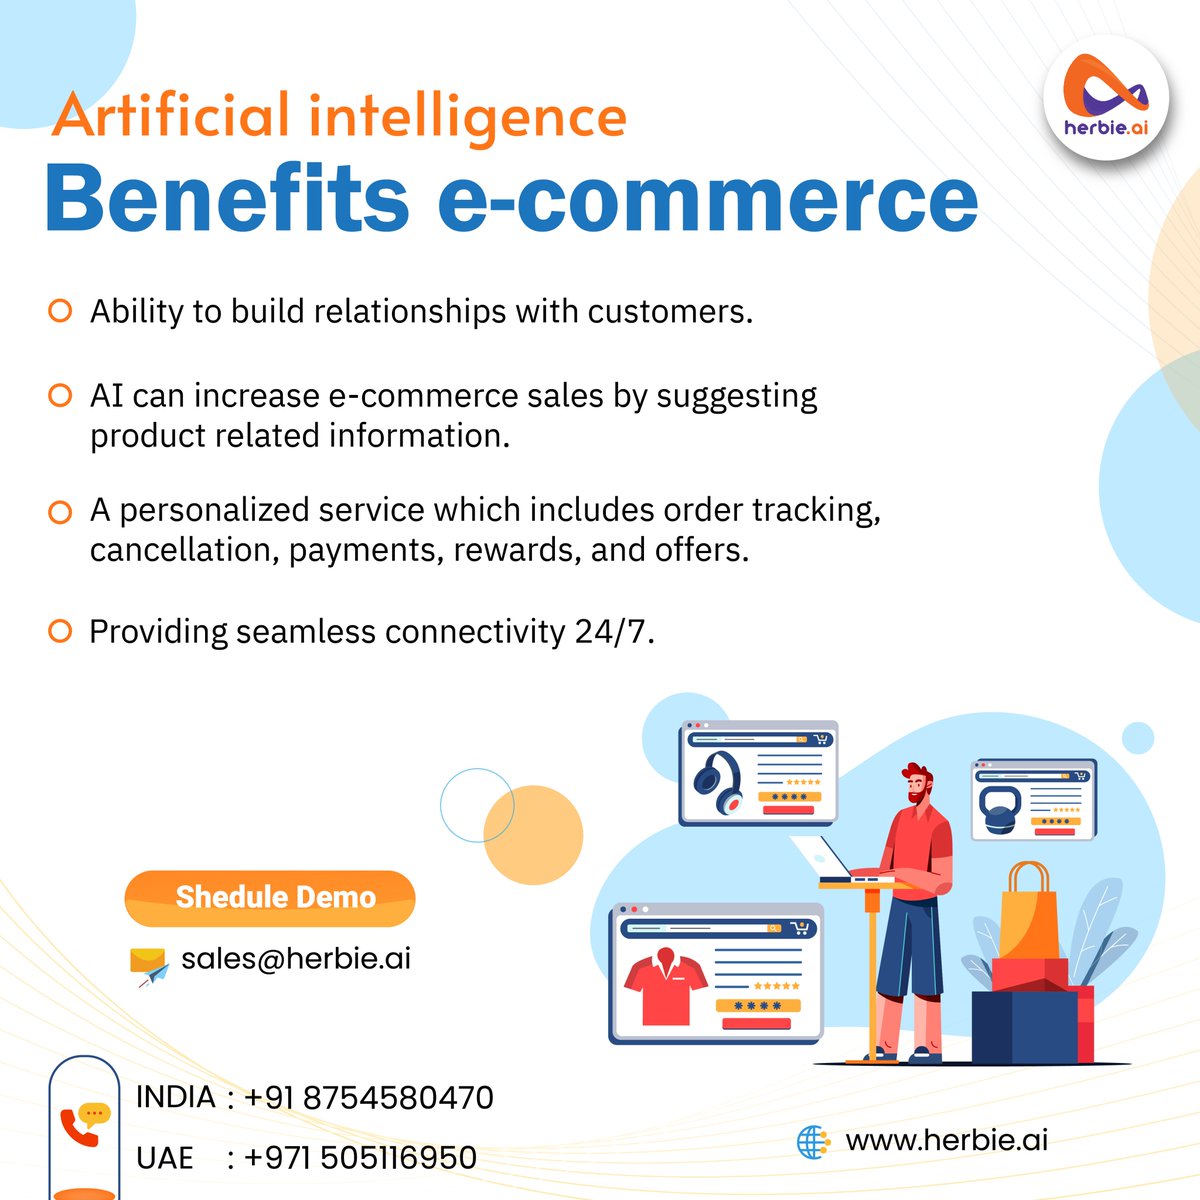 Boost sales, marketing, and operations with
Herbie conversational AI in e-Commerce.
Visit: herbie.ai

#eCommerce #eCommerceWebsite #ecommerceIndia #ecommercebusiness #ecommercestore #ecommerceappdesignanddevelopment #whatsApp #GoogleIO